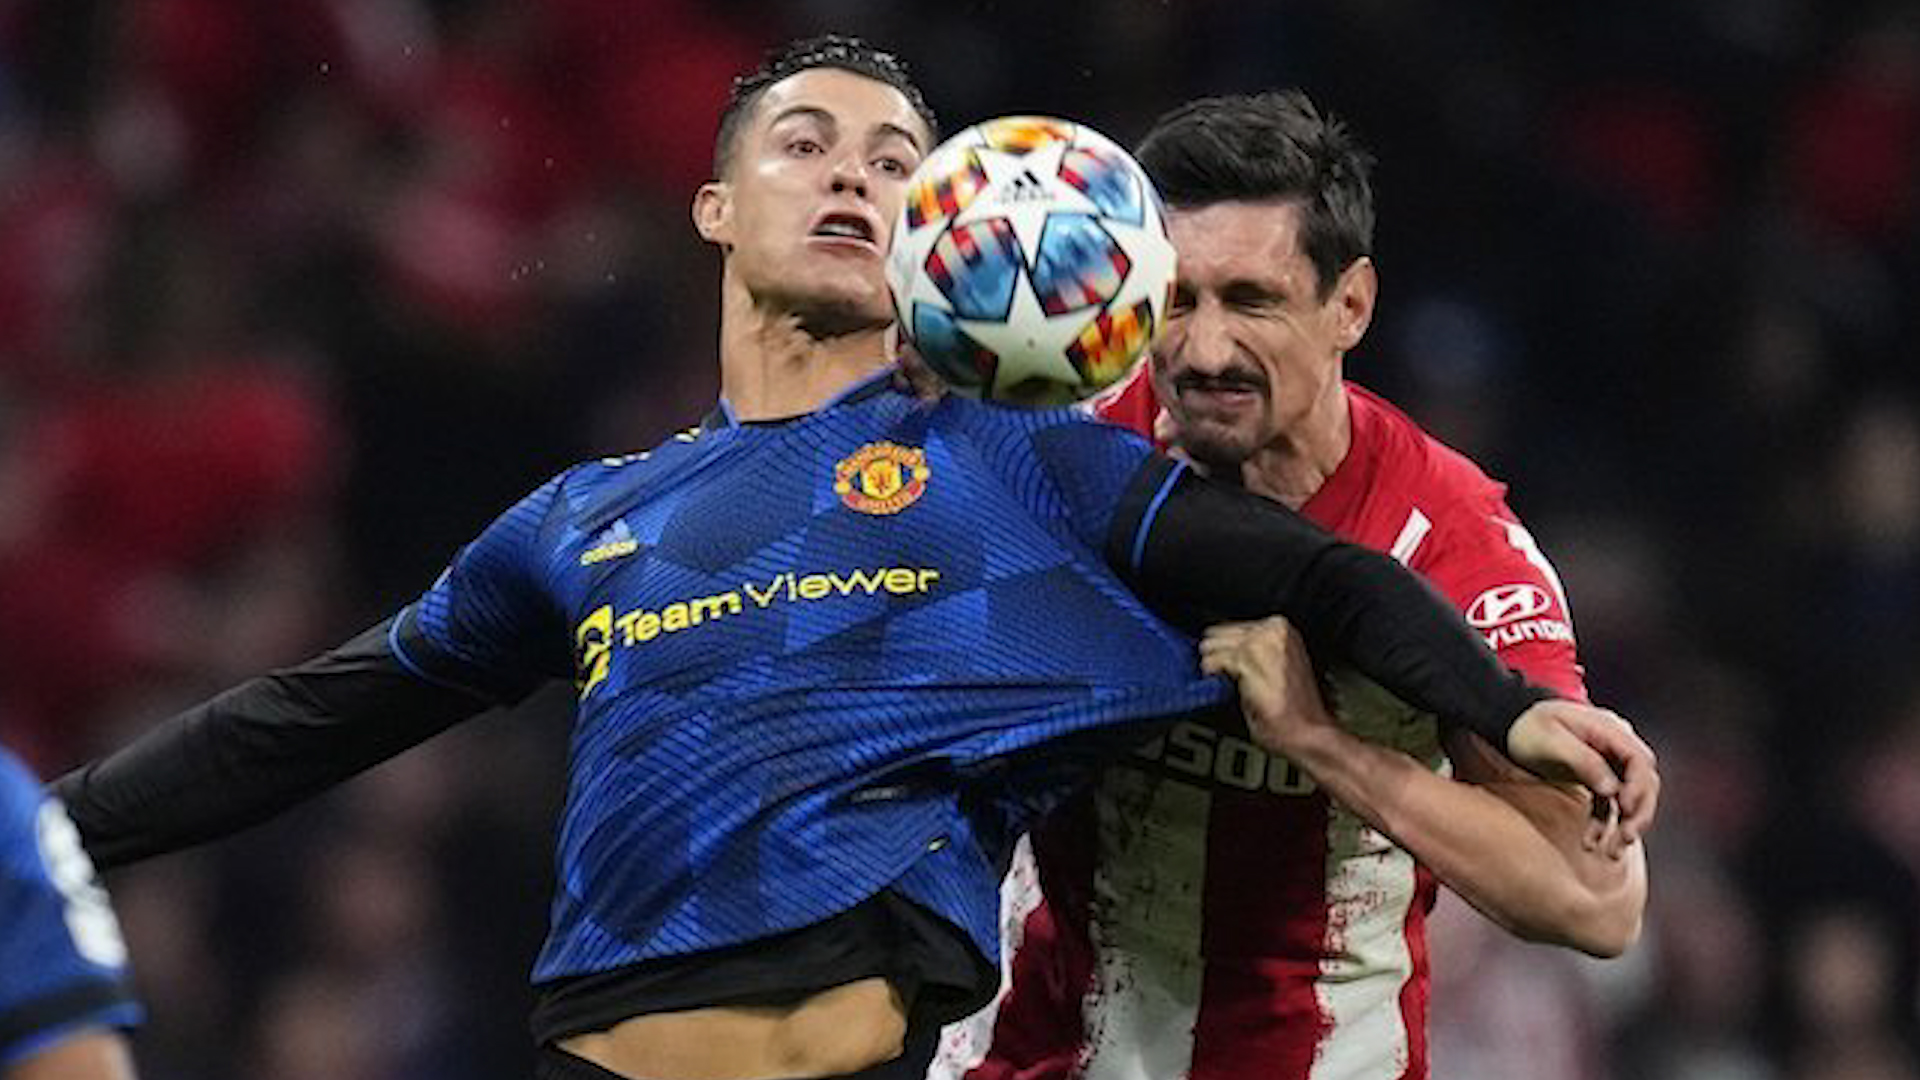 HIGHLIGHT CHAMPIONS LEAGUE ATLETICO MADRID VS MANCHESTER UNITED 1-1